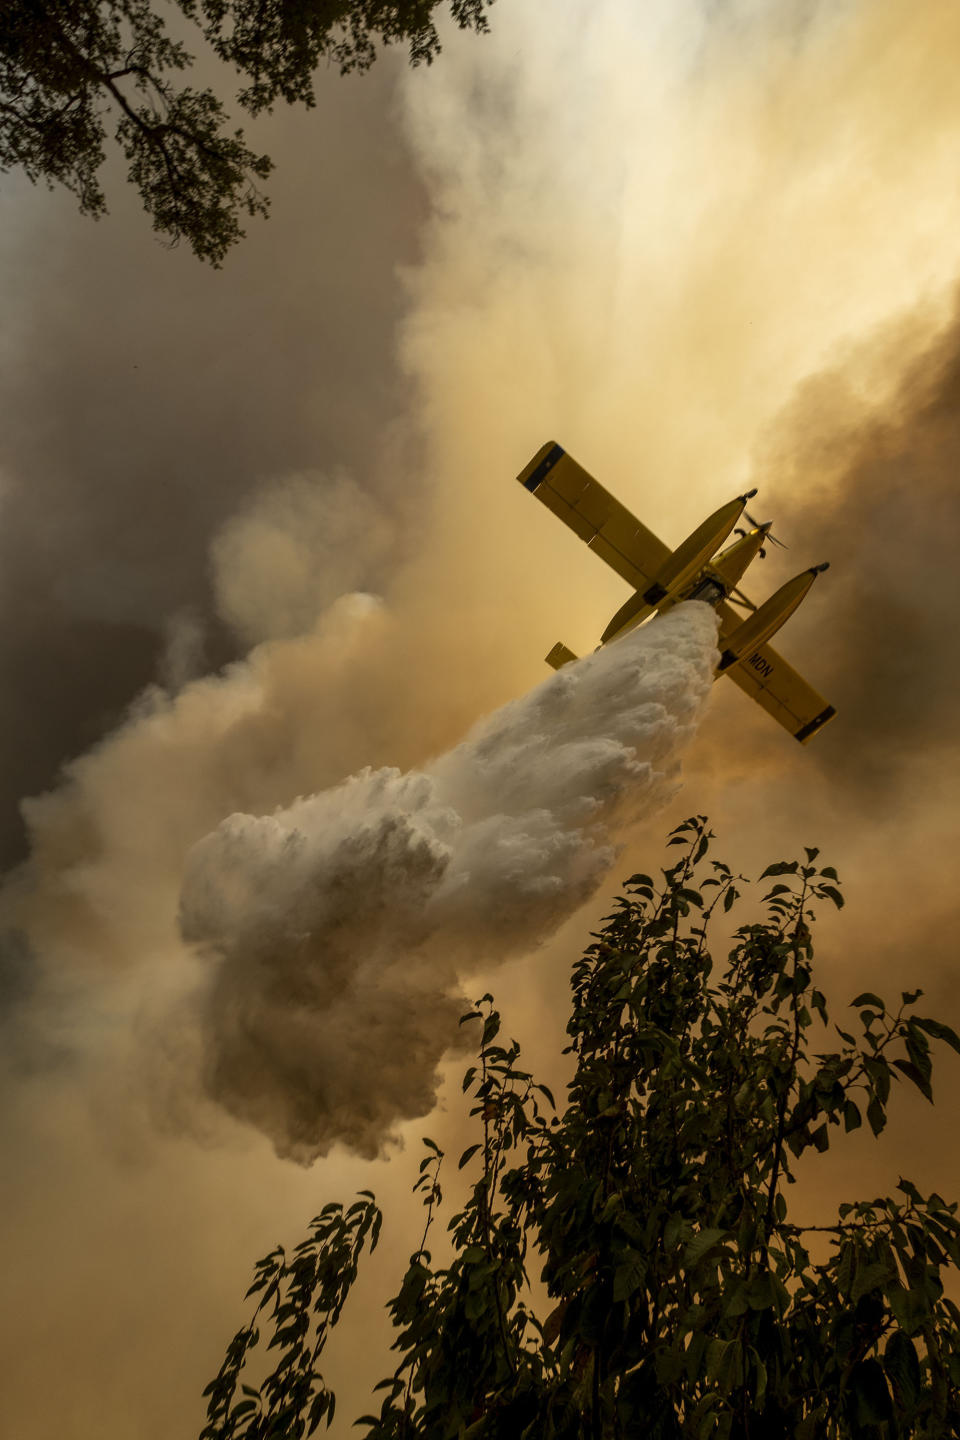 An airplane operates over a fire at the village of Chaveira, near Macao, in central Portugal on Monday, July 22, 2019. More than 1,000 firefighters are battling a major wildfire amid scorching temperatures in Portugal, where forest blazes wreak destruction every summer. About 90% of the fire area in the Castelo Branco district, 200 kilometers (about 125 miles) northeast of the capital Lisbon, has been brought under control during cooler overnight temperatures, according to a local Civil Protection Agency commander. (AP Photo/Sergio Azenha)